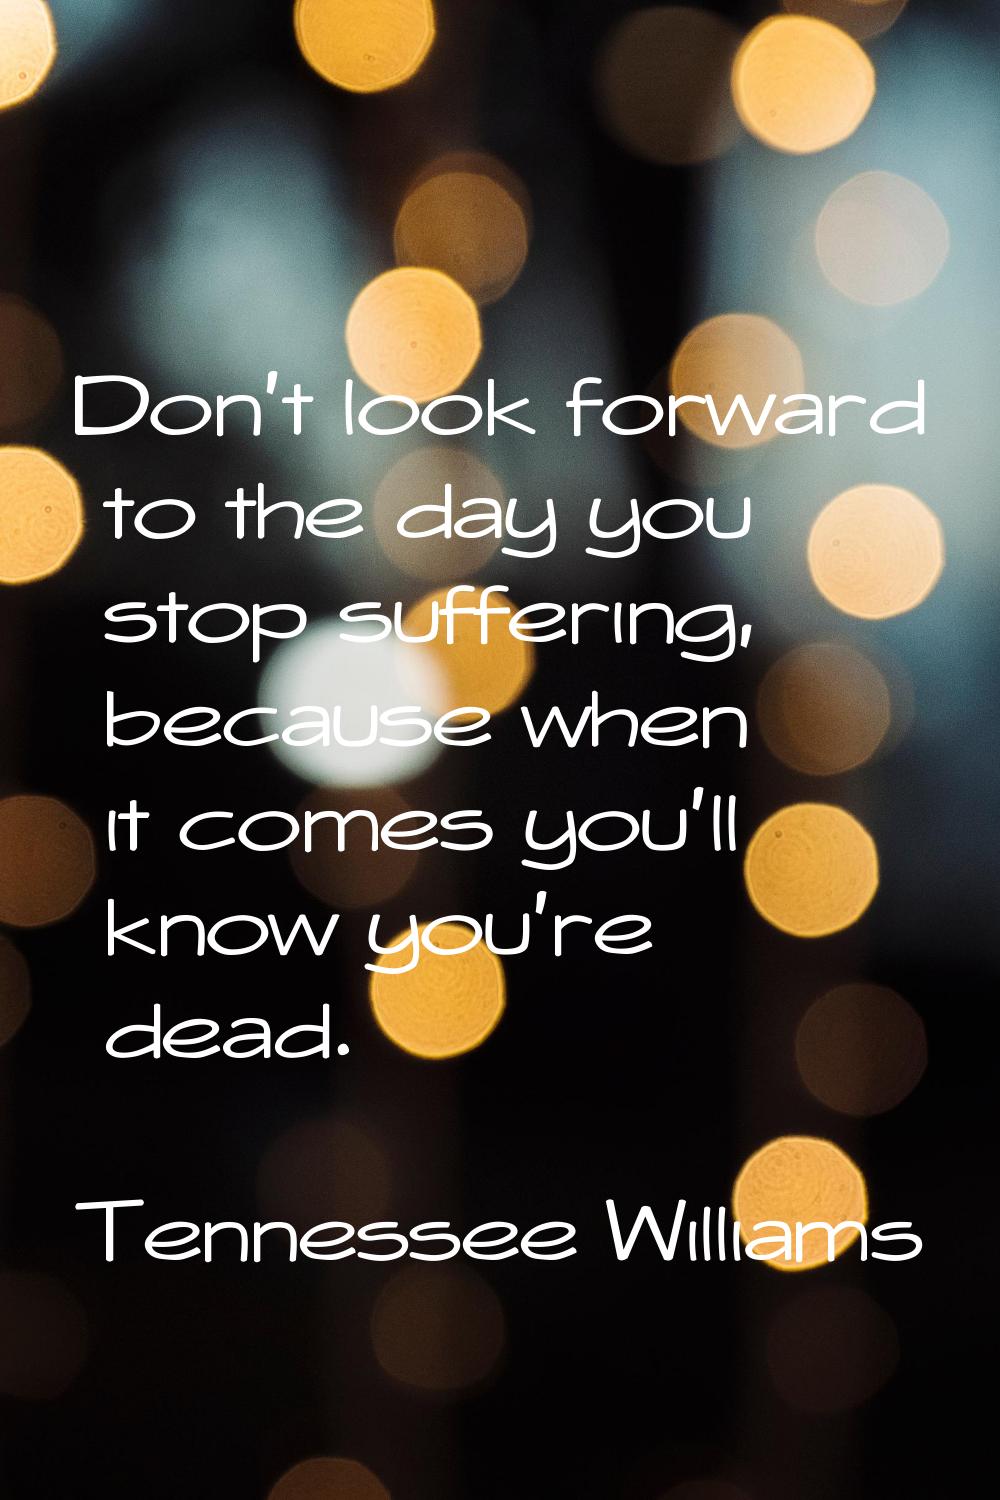 Don't look forward to the day you stop suffering, because when it comes you'll know you're dead.